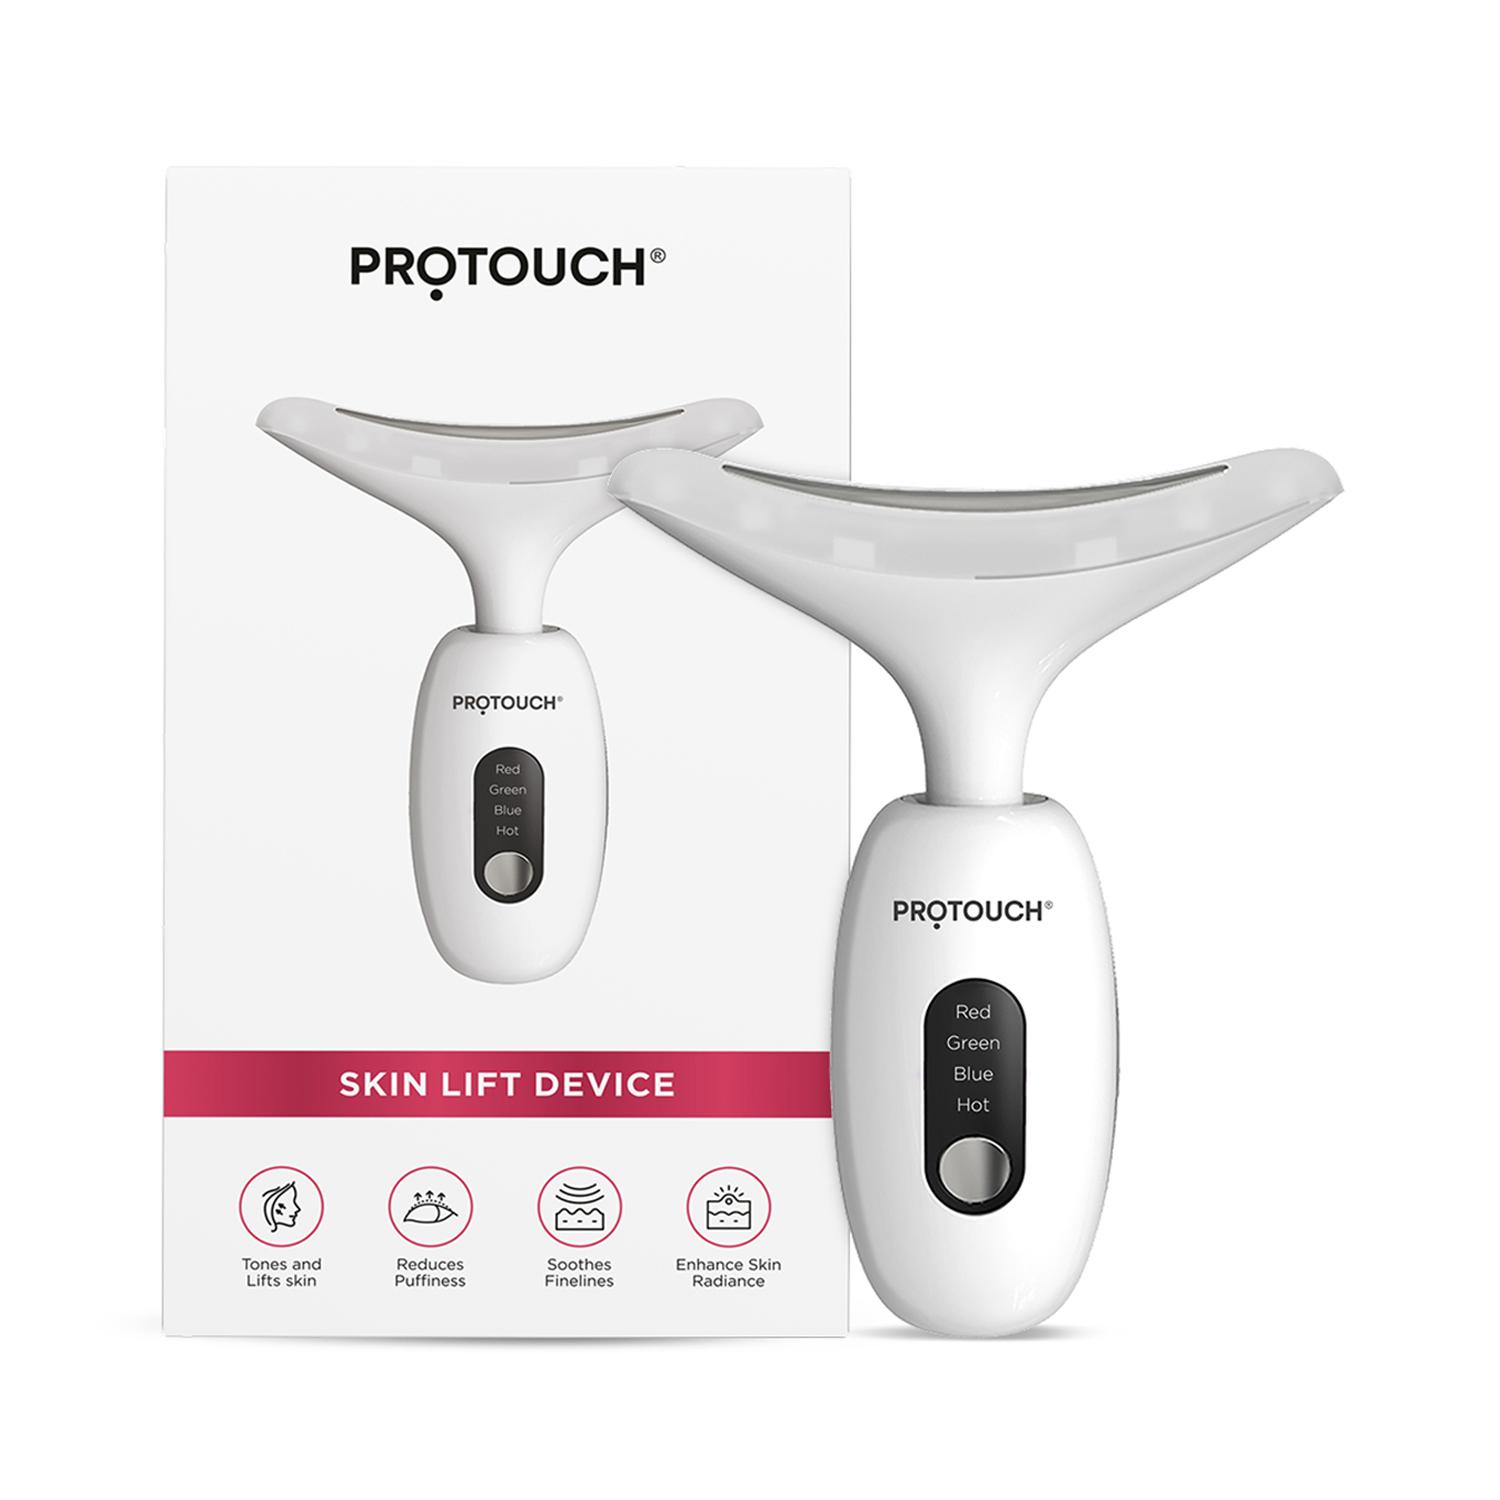 Protouch | Protouch Skin Lift Device -  Facial Massager for Youthful Bright Uplifted Glowing Facial at Home